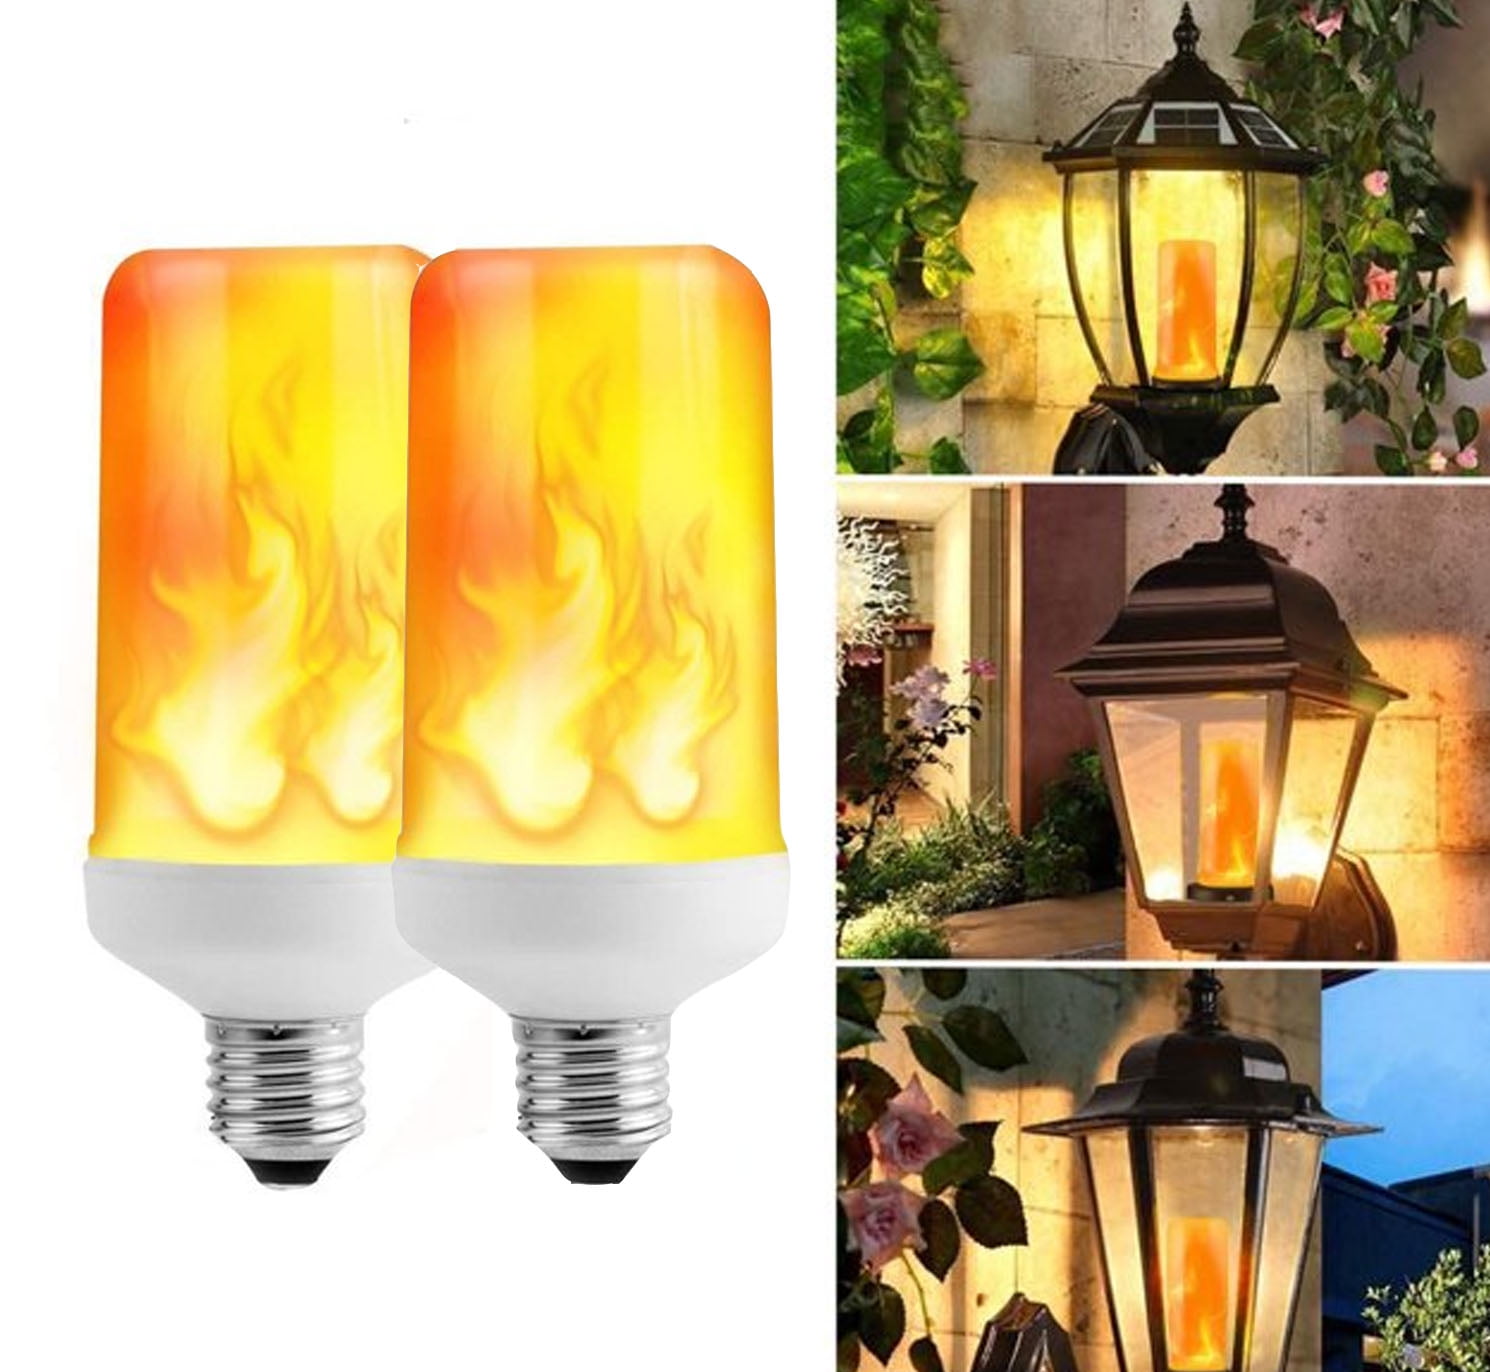 2 Pack LED Flame Effect Simulated Nature Fire Light Bulb E27 Decoration Lamp 